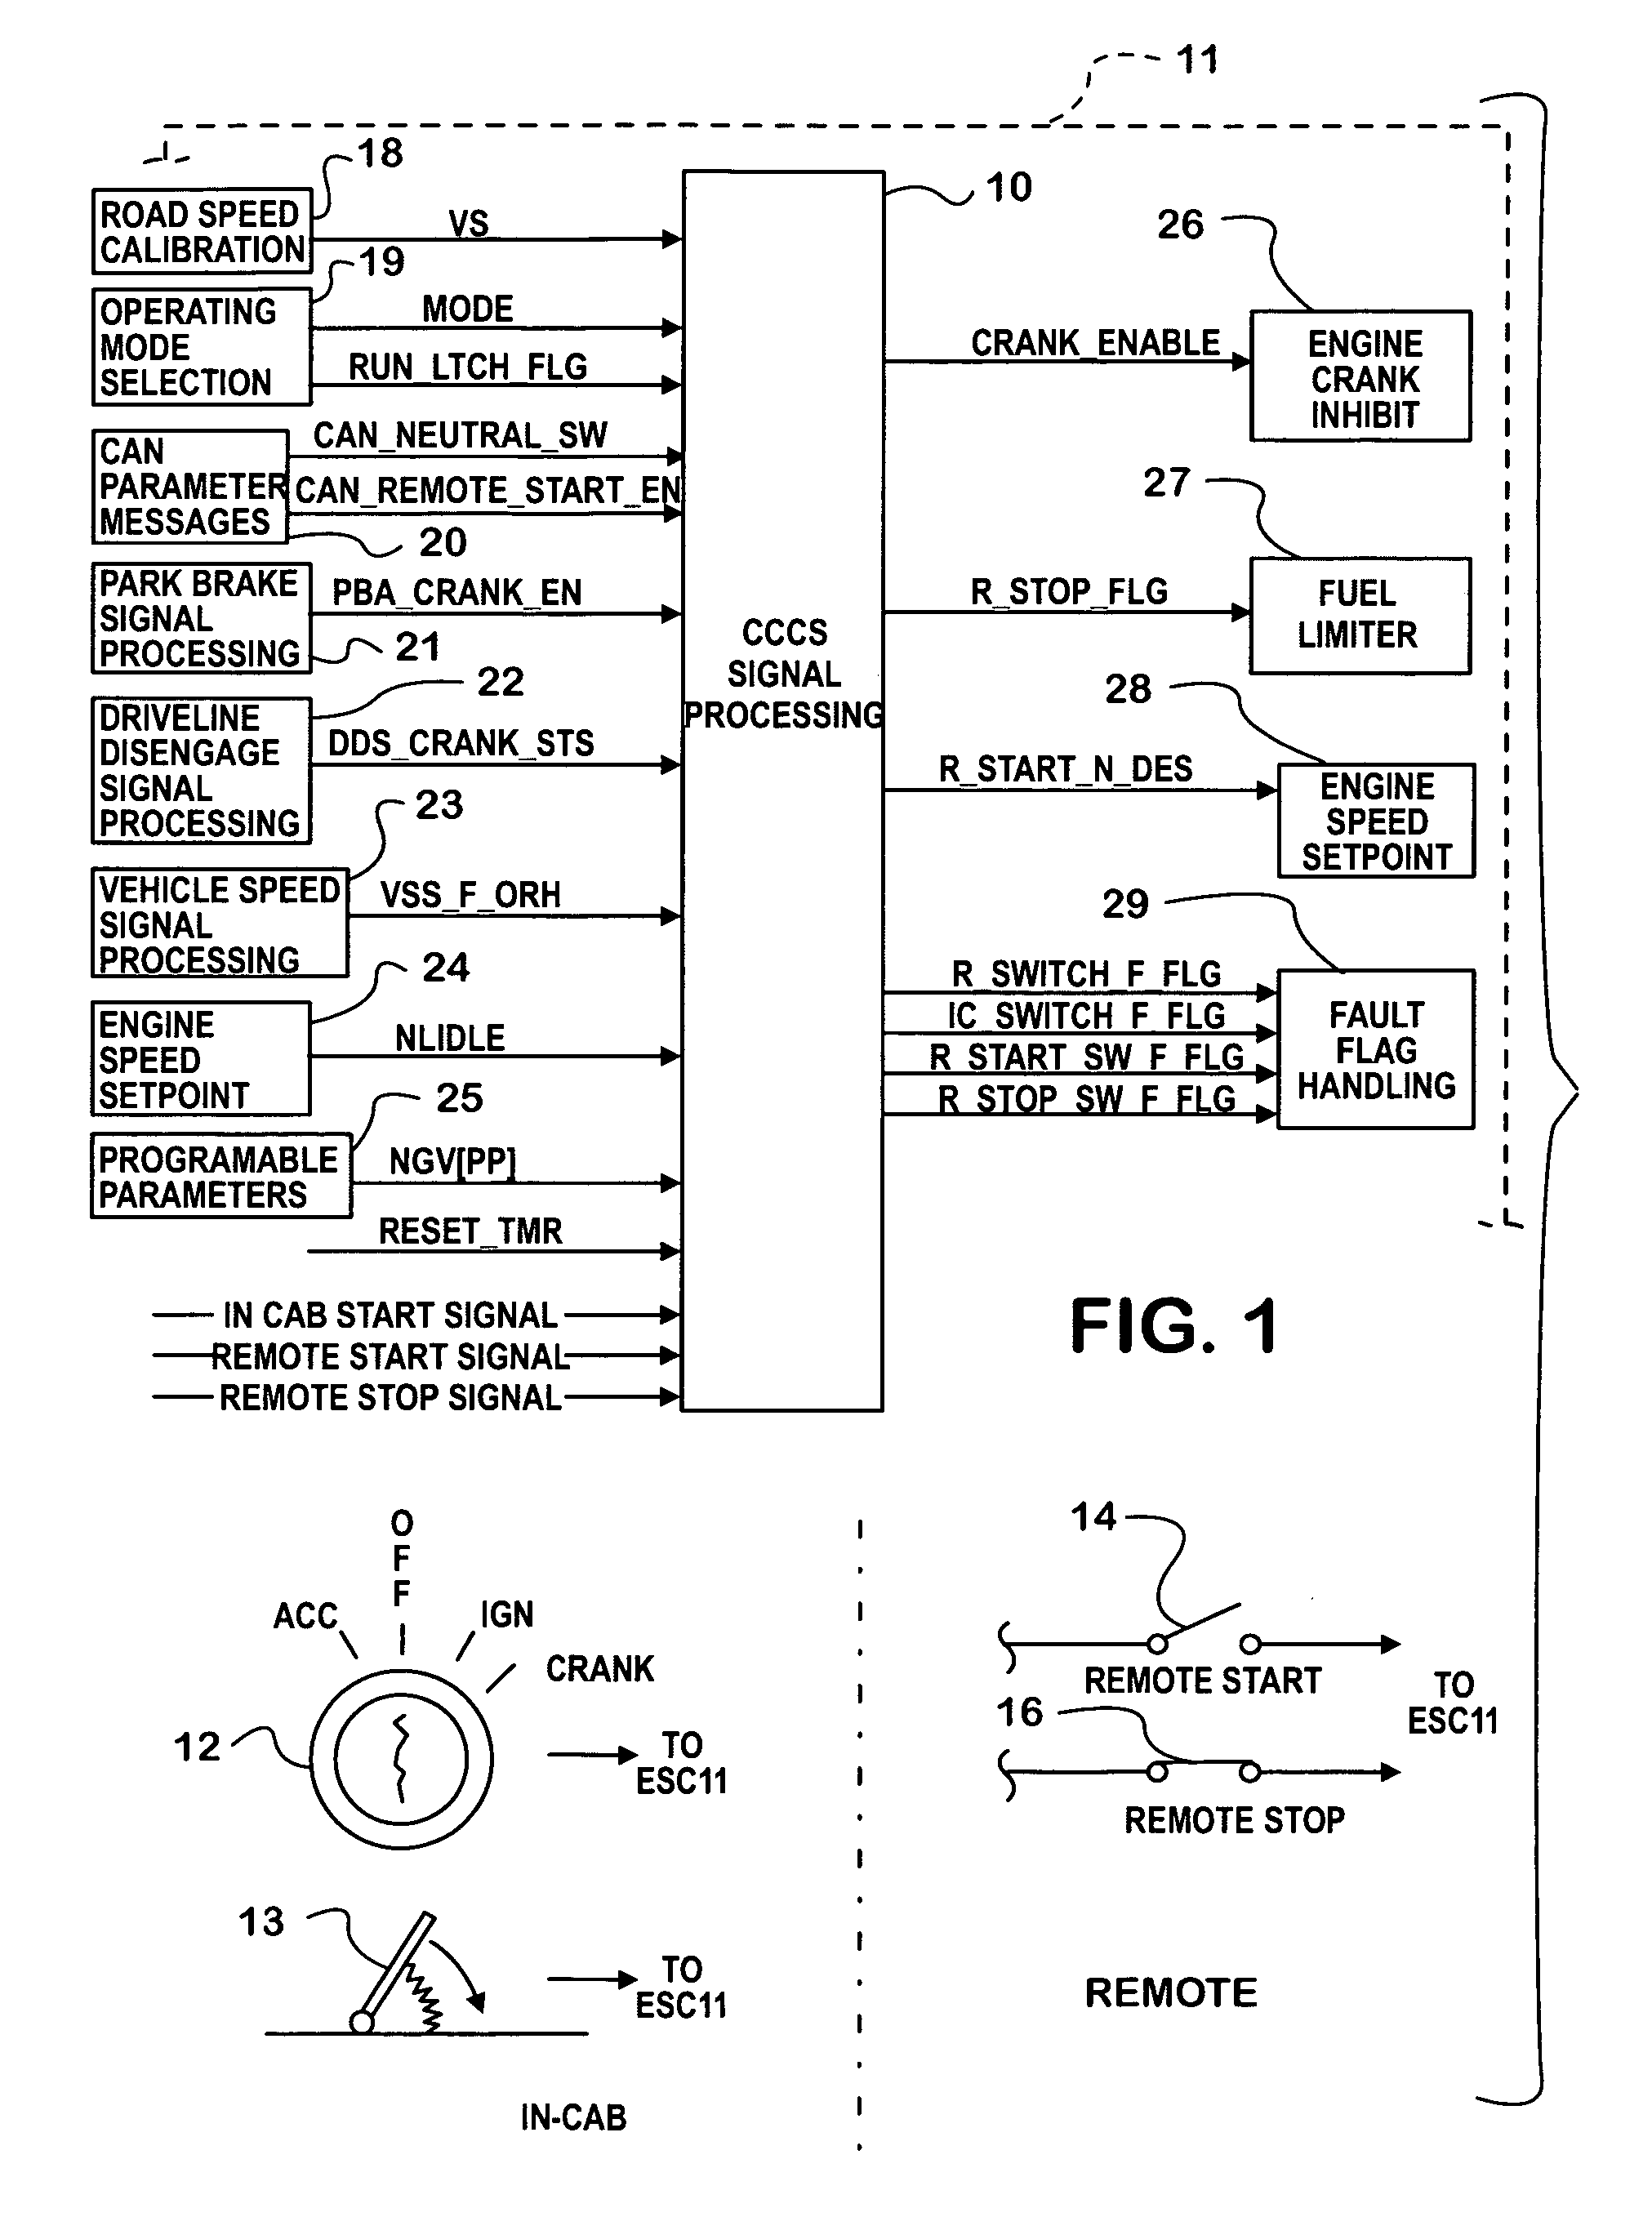 Remote control of engine operation in a motor vehicle